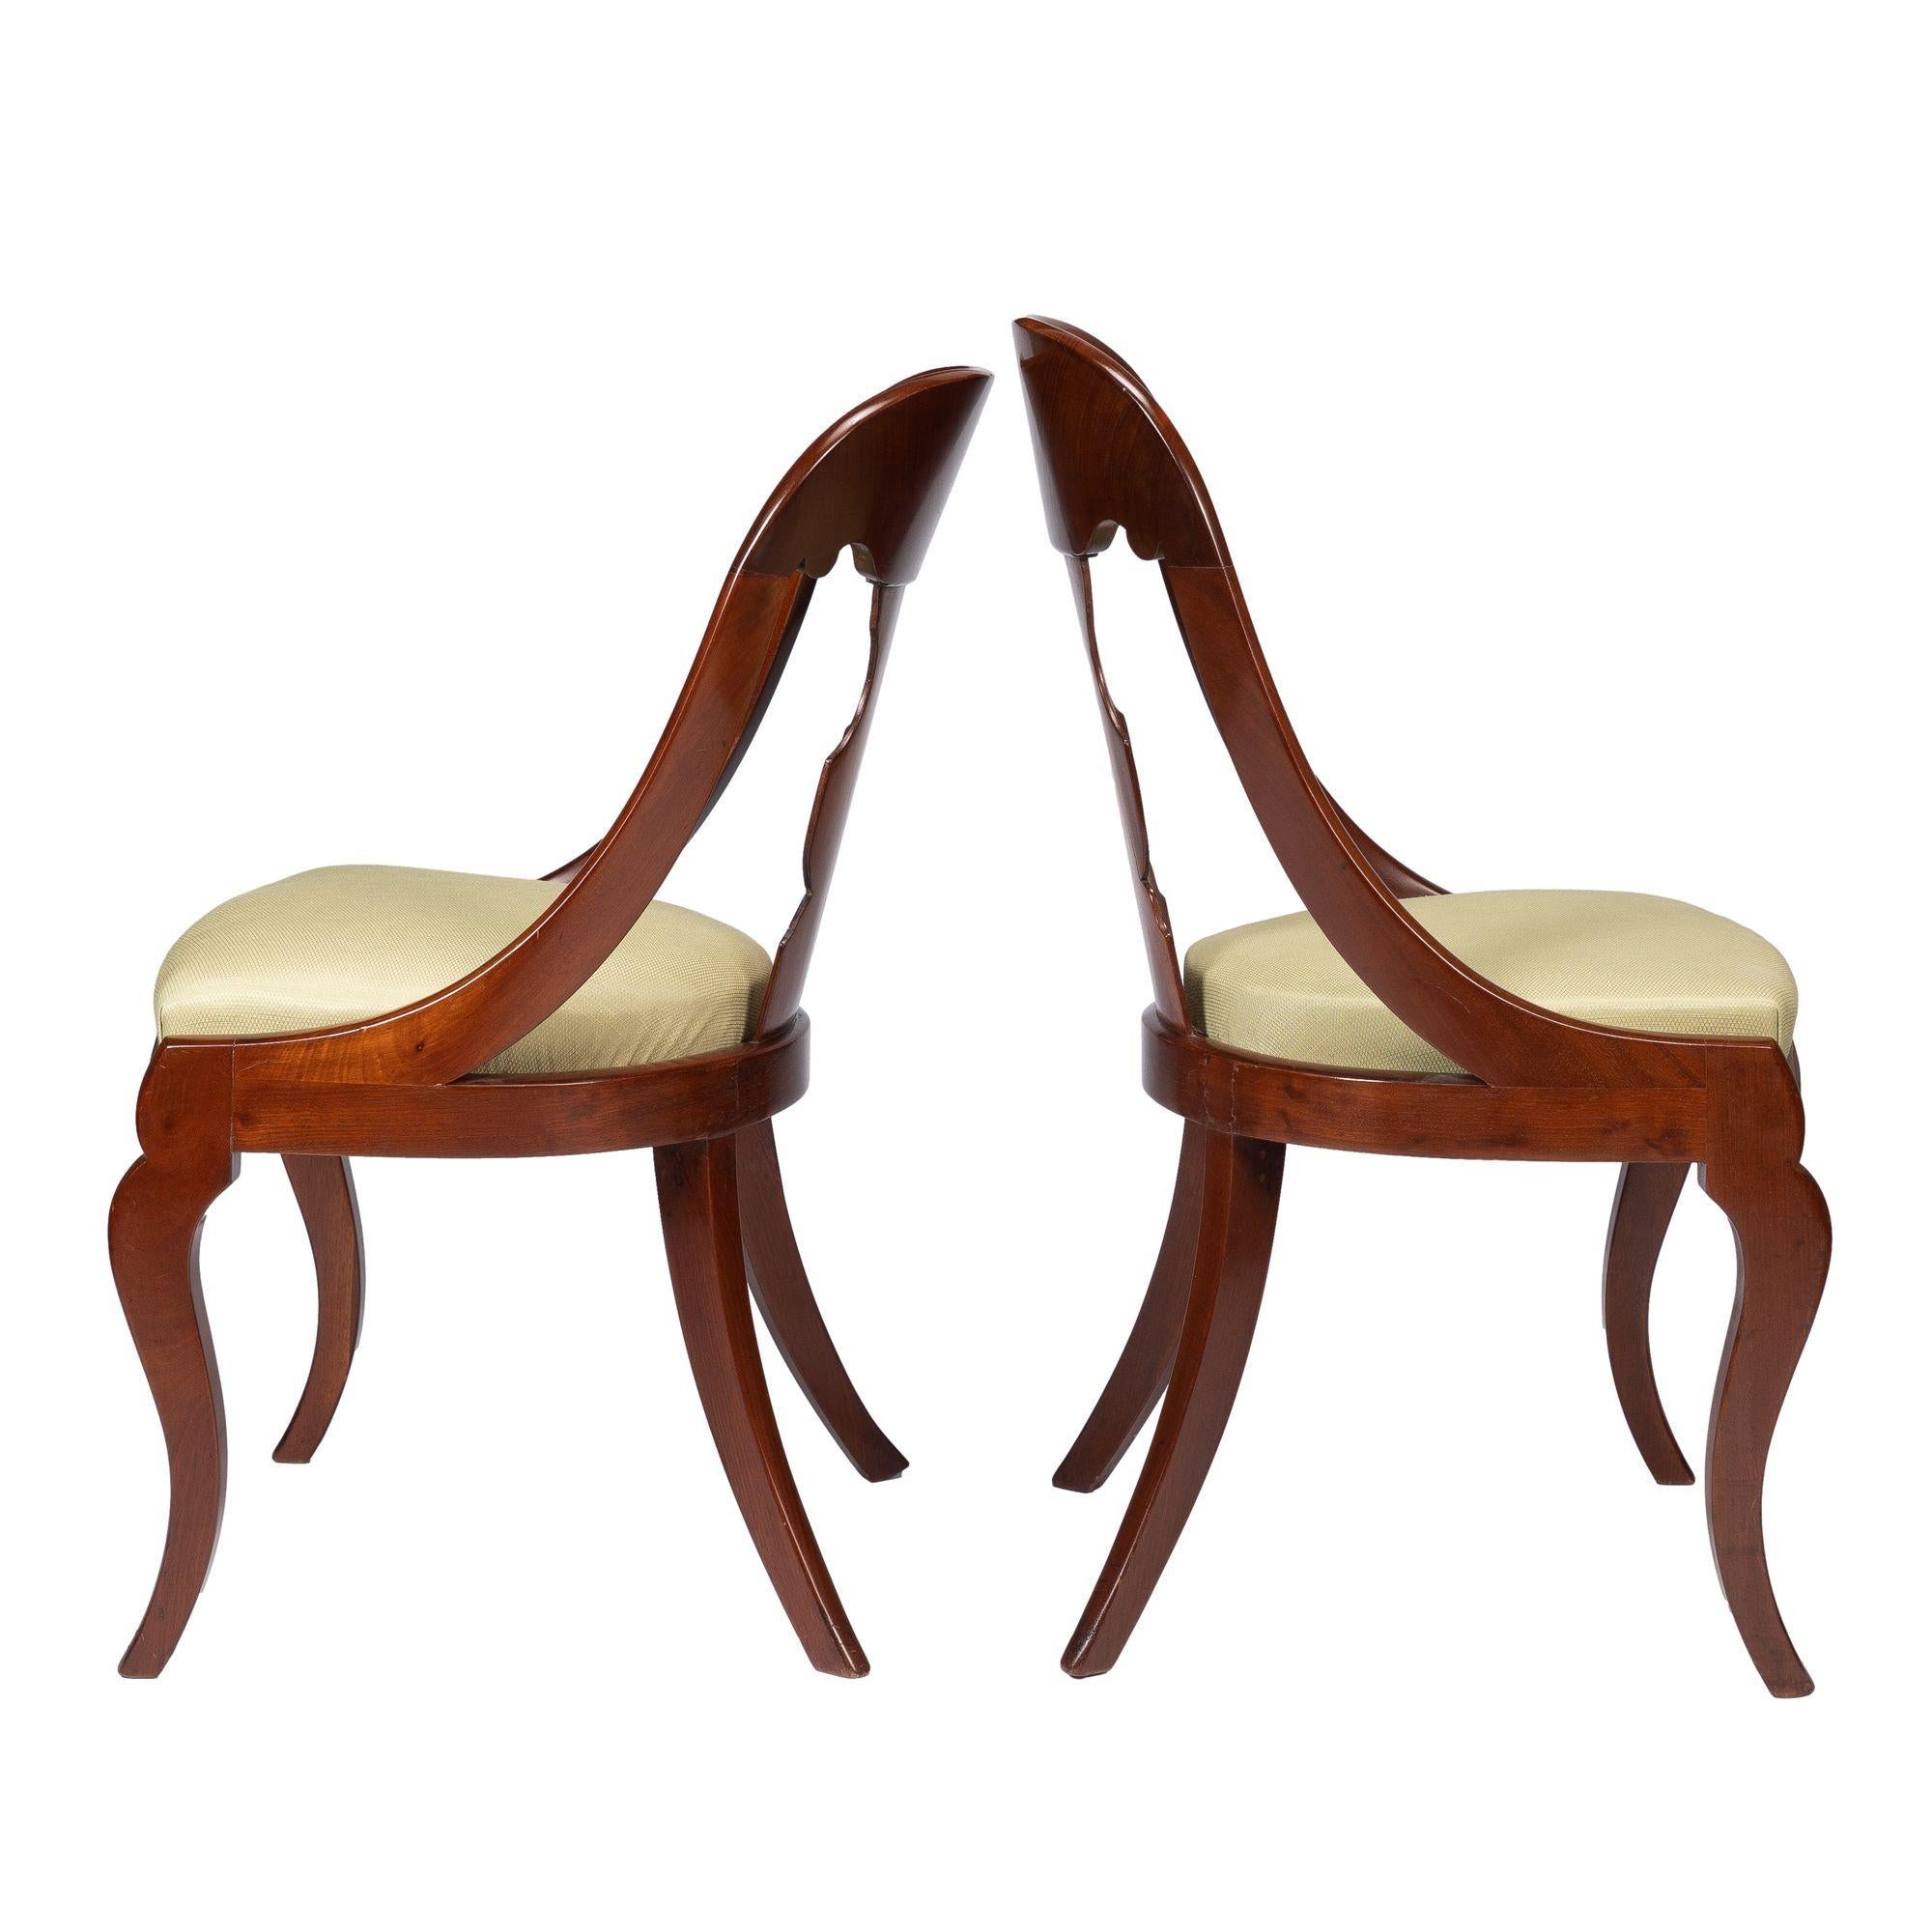 Upholstery Pair of American Mahogany Gondola Chairs, 1815-35 For Sale